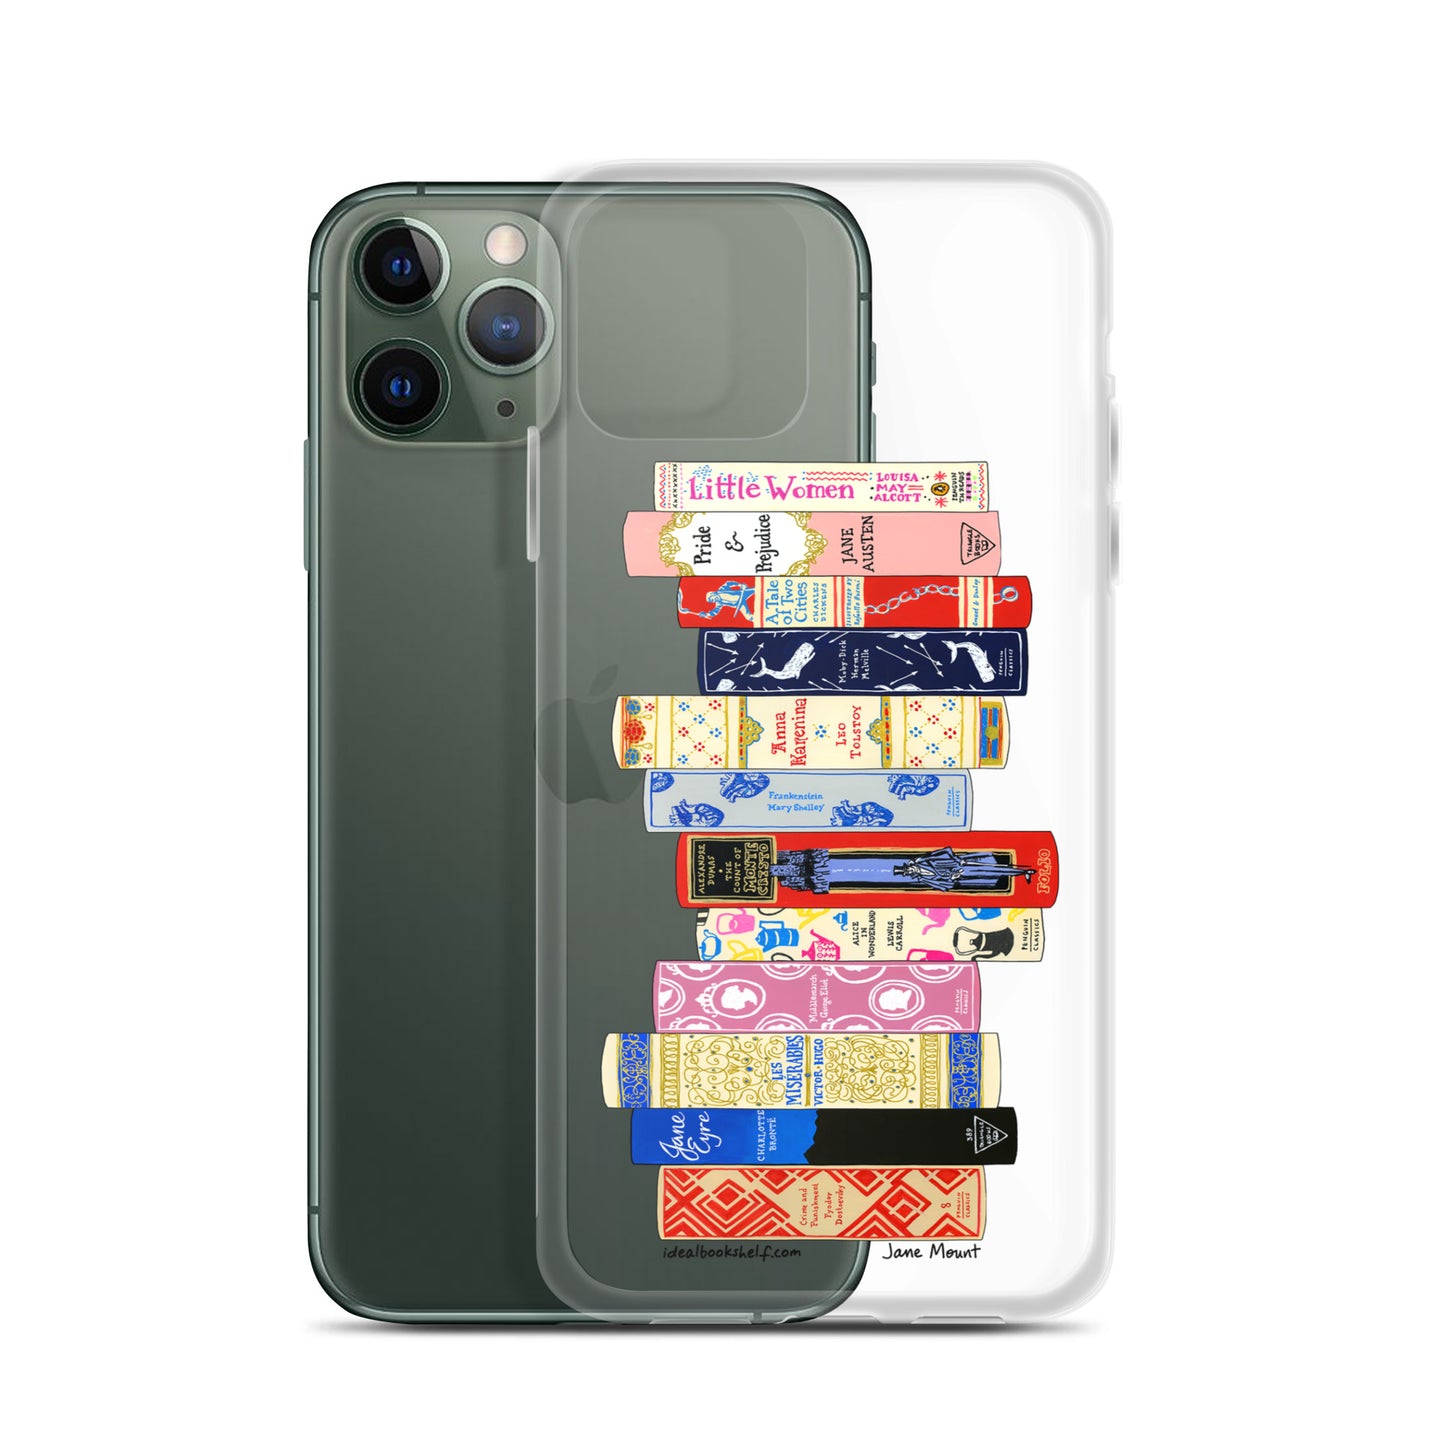 Novels of the 1800s - iPhone Case